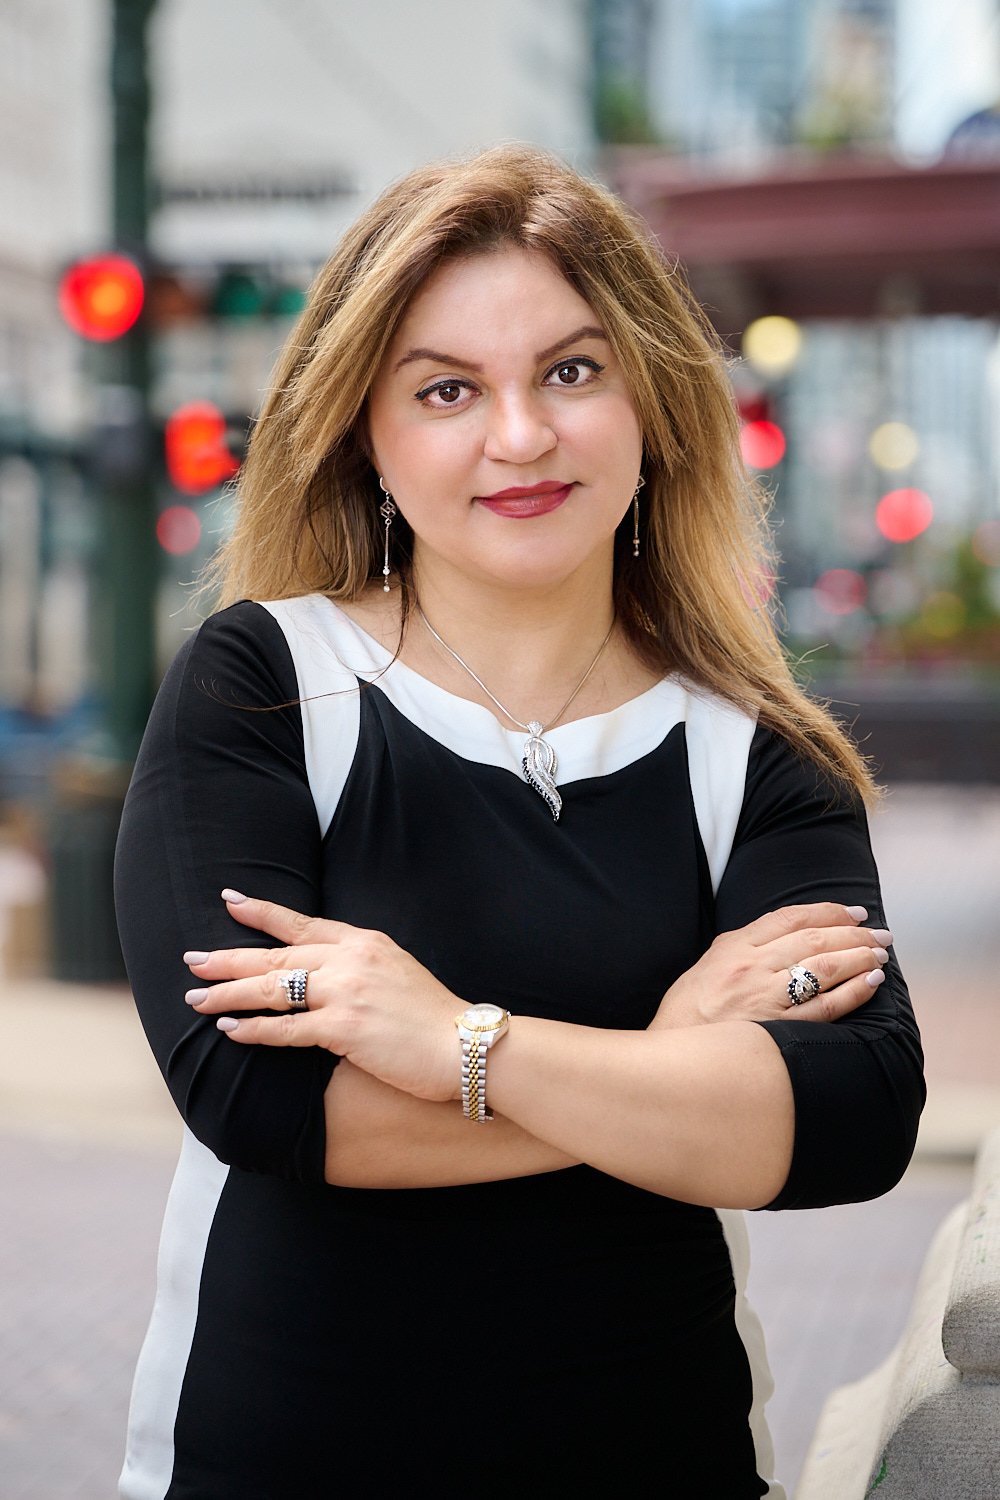  HOUSTON, TEXAS - AUGUST 27TH 2022: Rezvan Azimi is posing for her business headshots and marketing portraits for her real estate portfolio and social media feed. She looks professional in black dress 